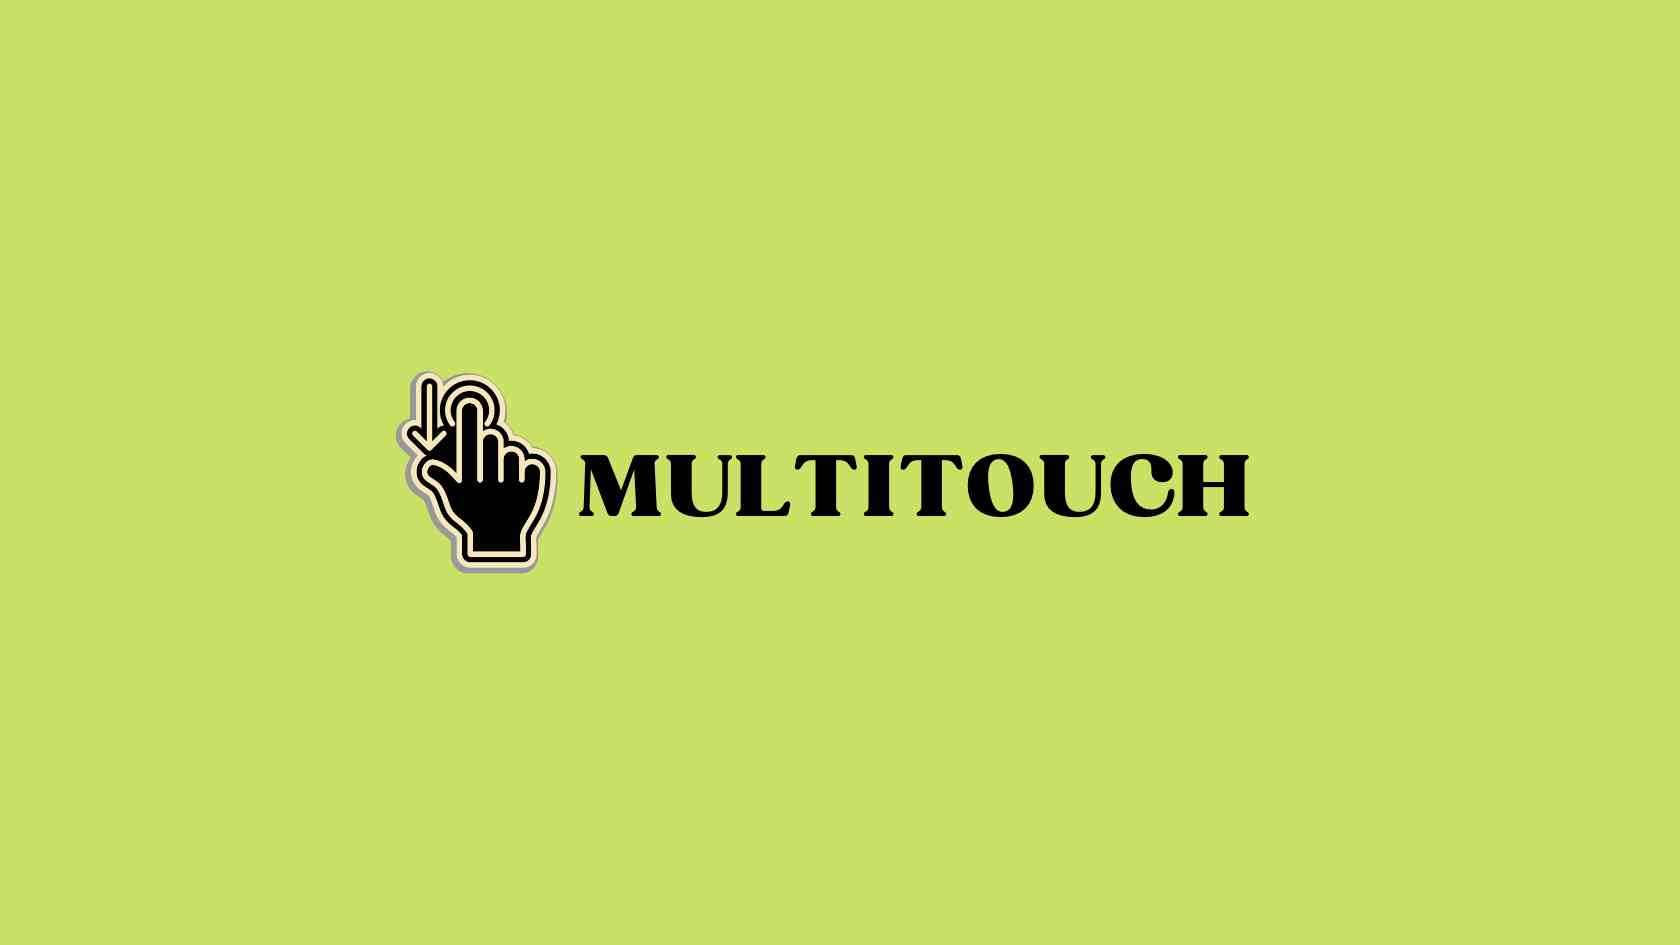 Multitouch